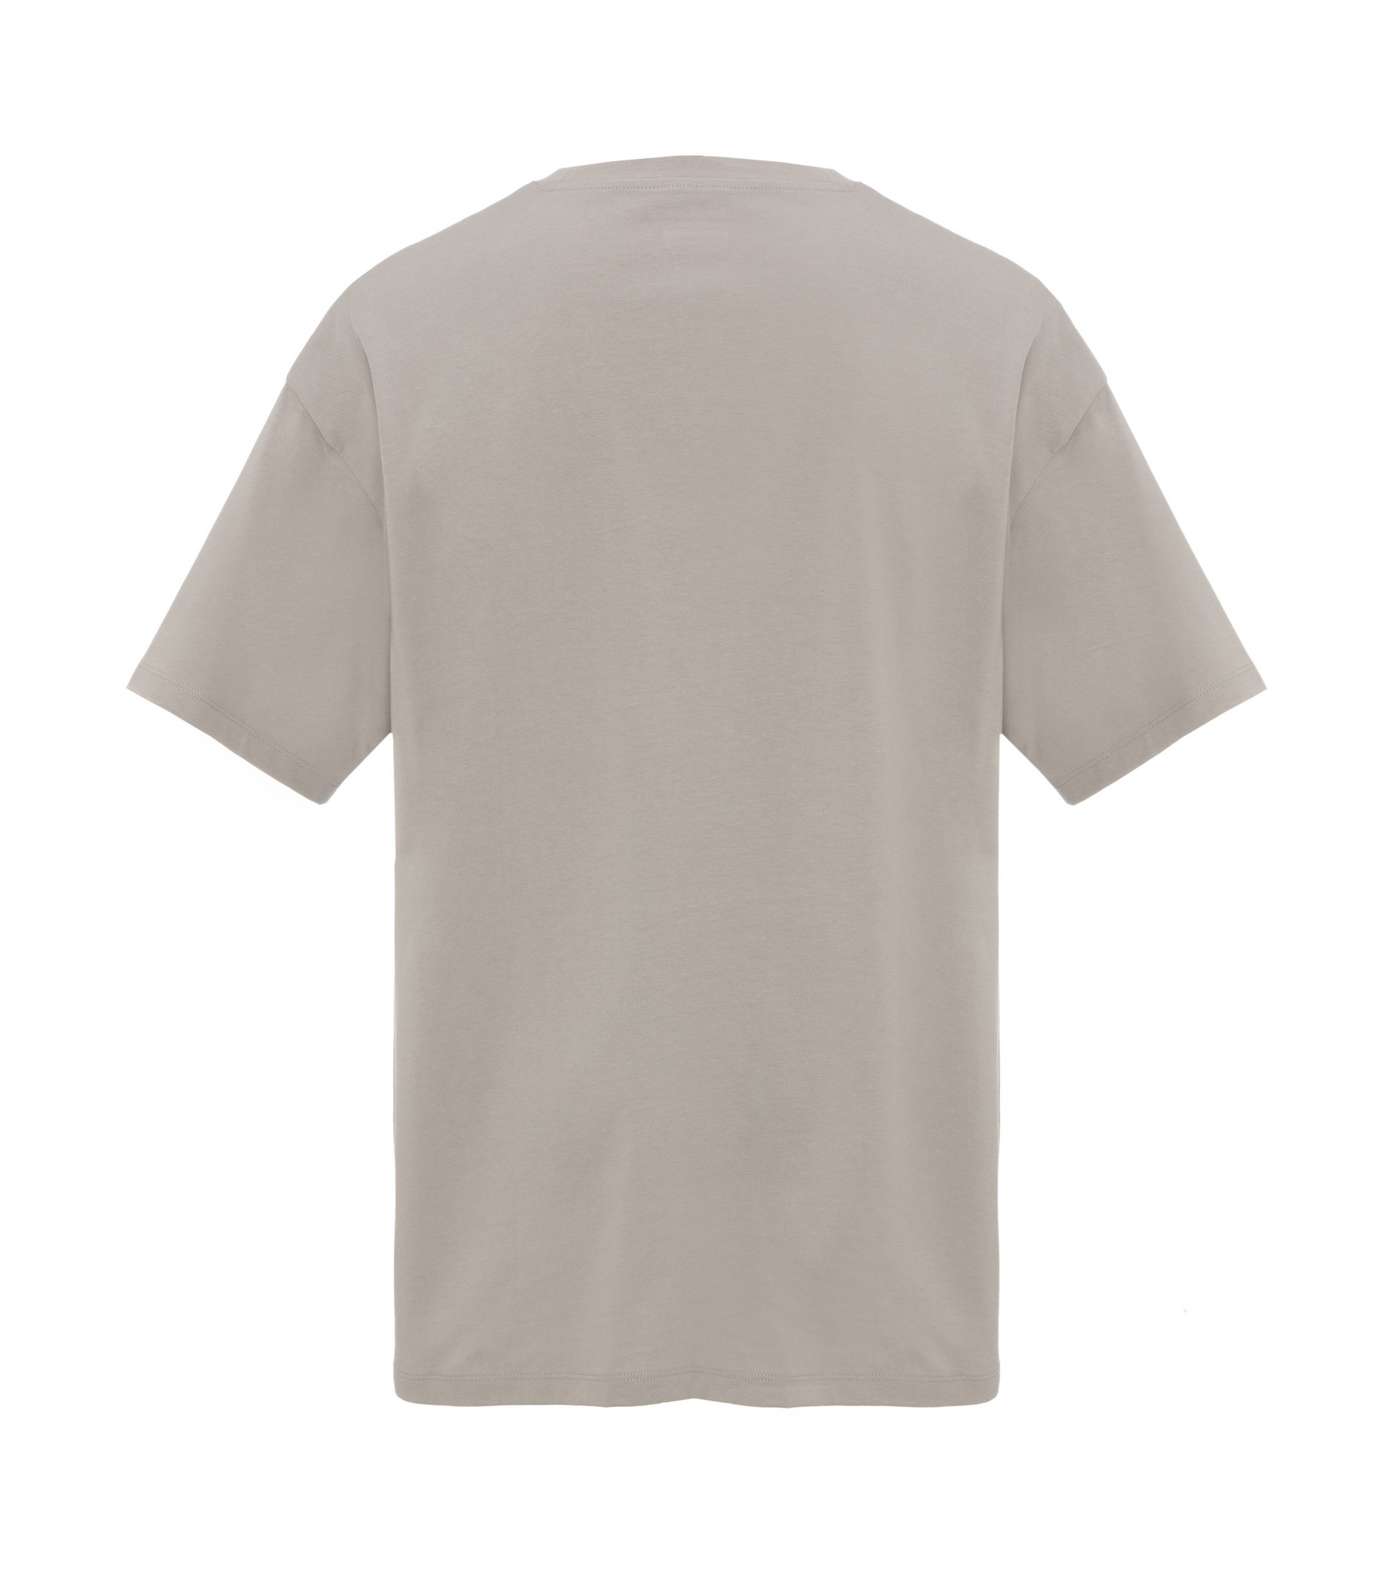 Grey Plain Relaxed Fit T-Shirt Image 2